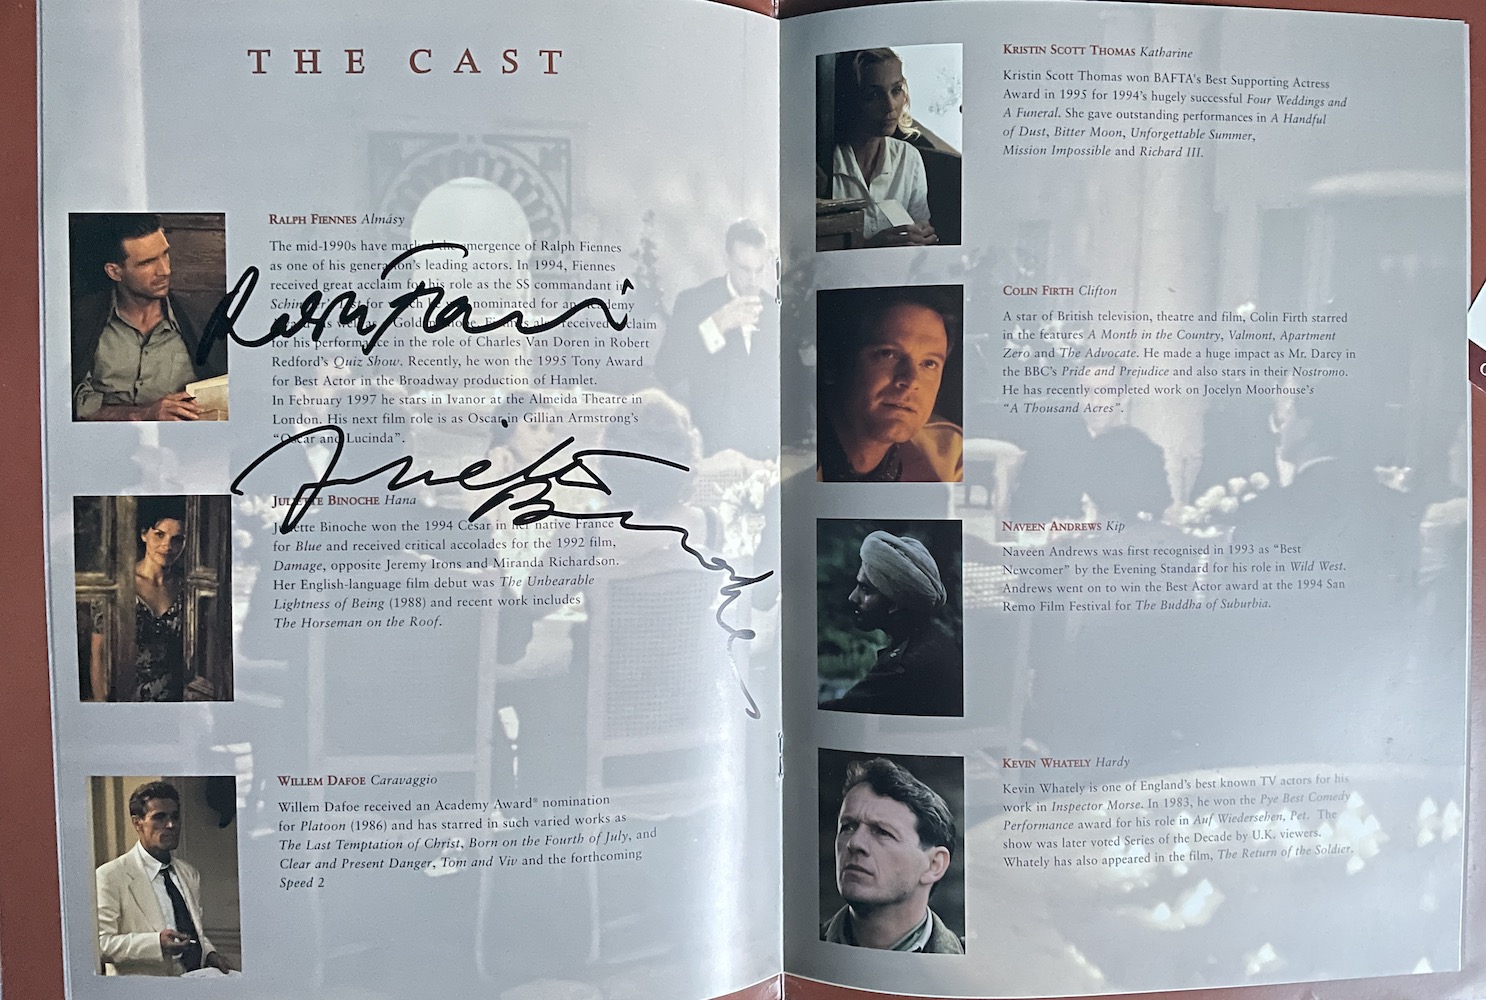 Ralph Fiennes, Juliette Binoche Miramax Films Press Booklet for The English Patient Signed to